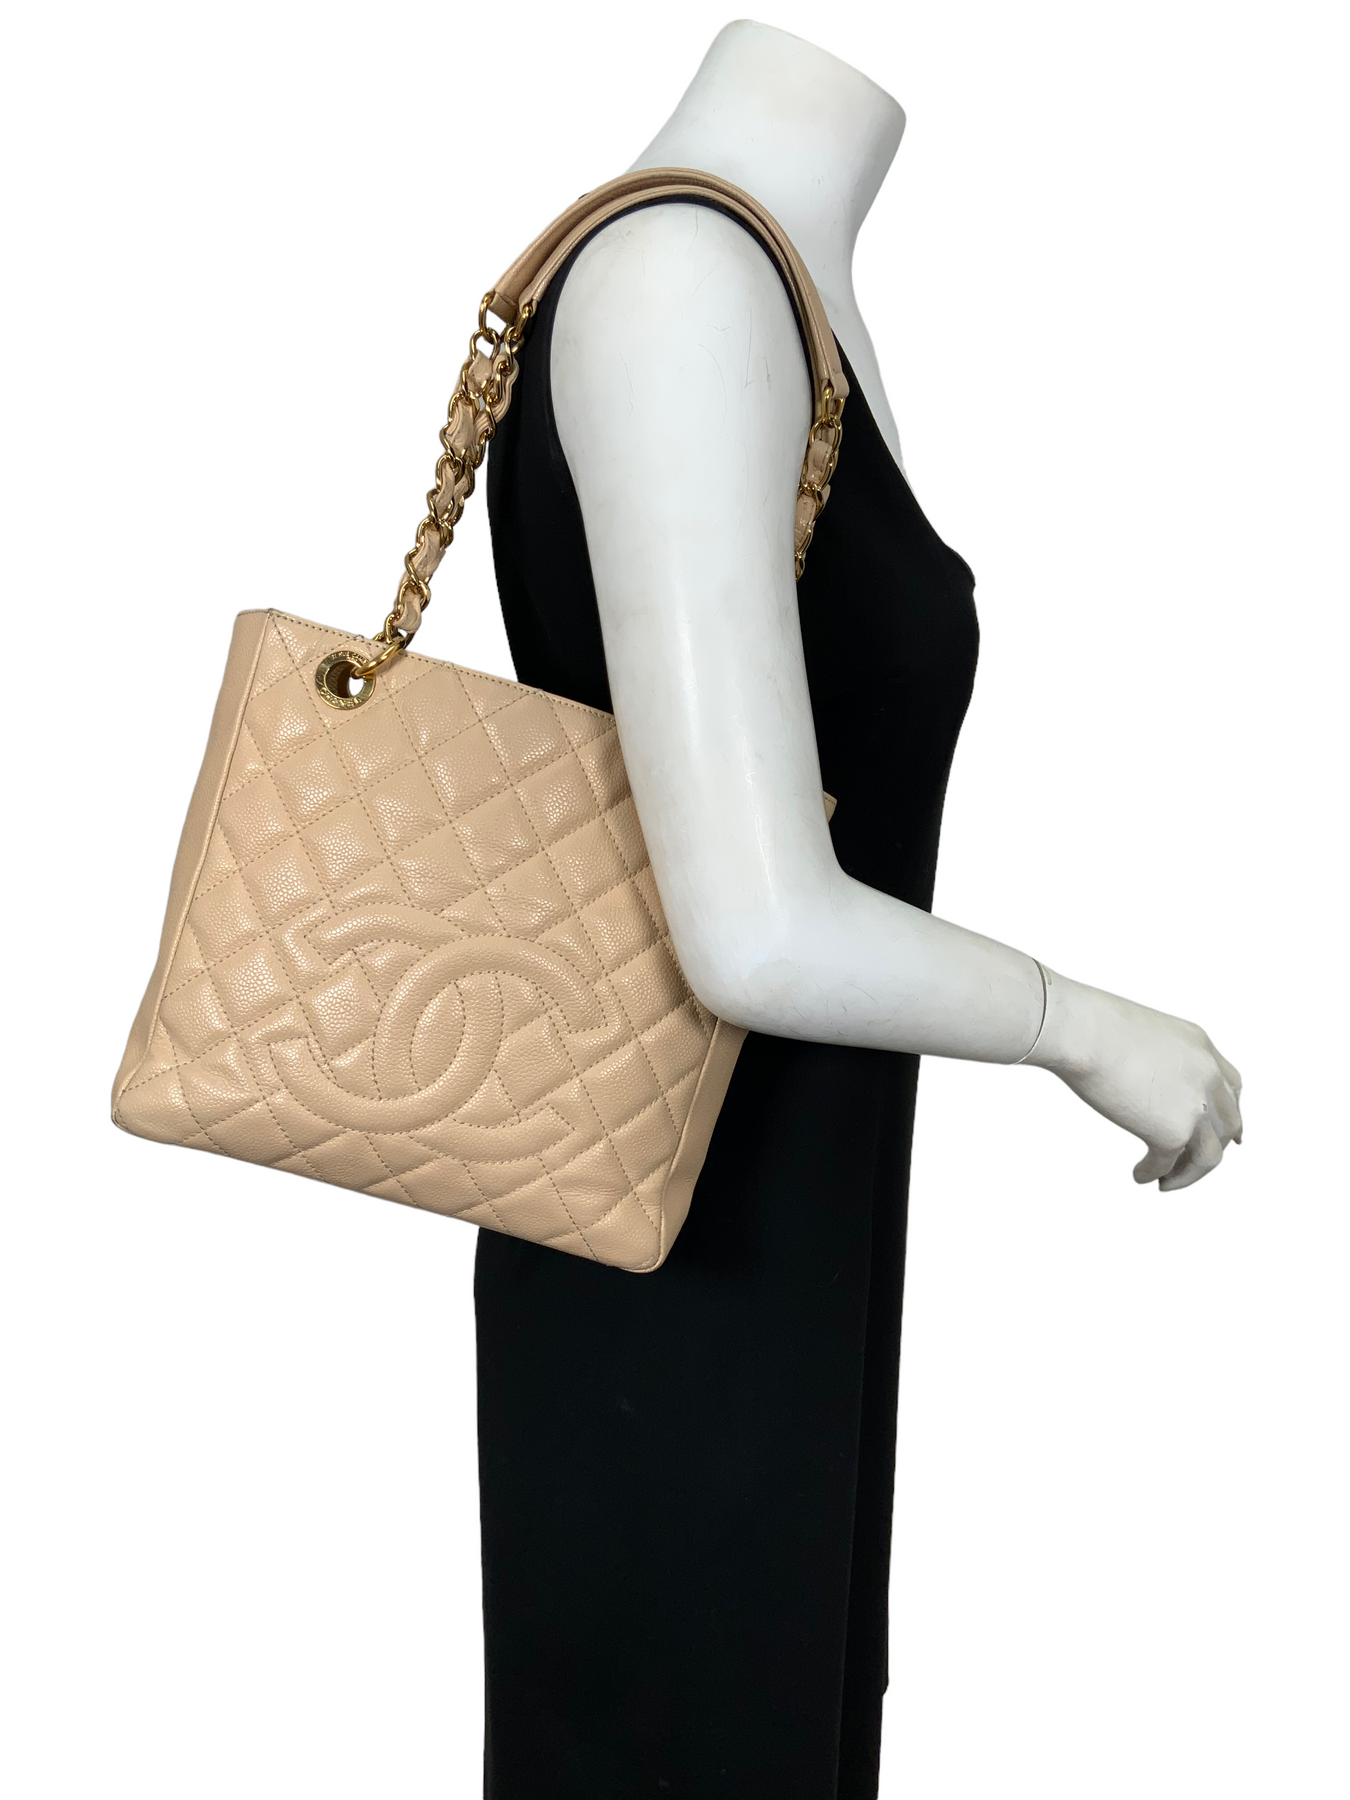 CHANEL Caviar Leather Petite Shopping Tote PST - Consigned Designs